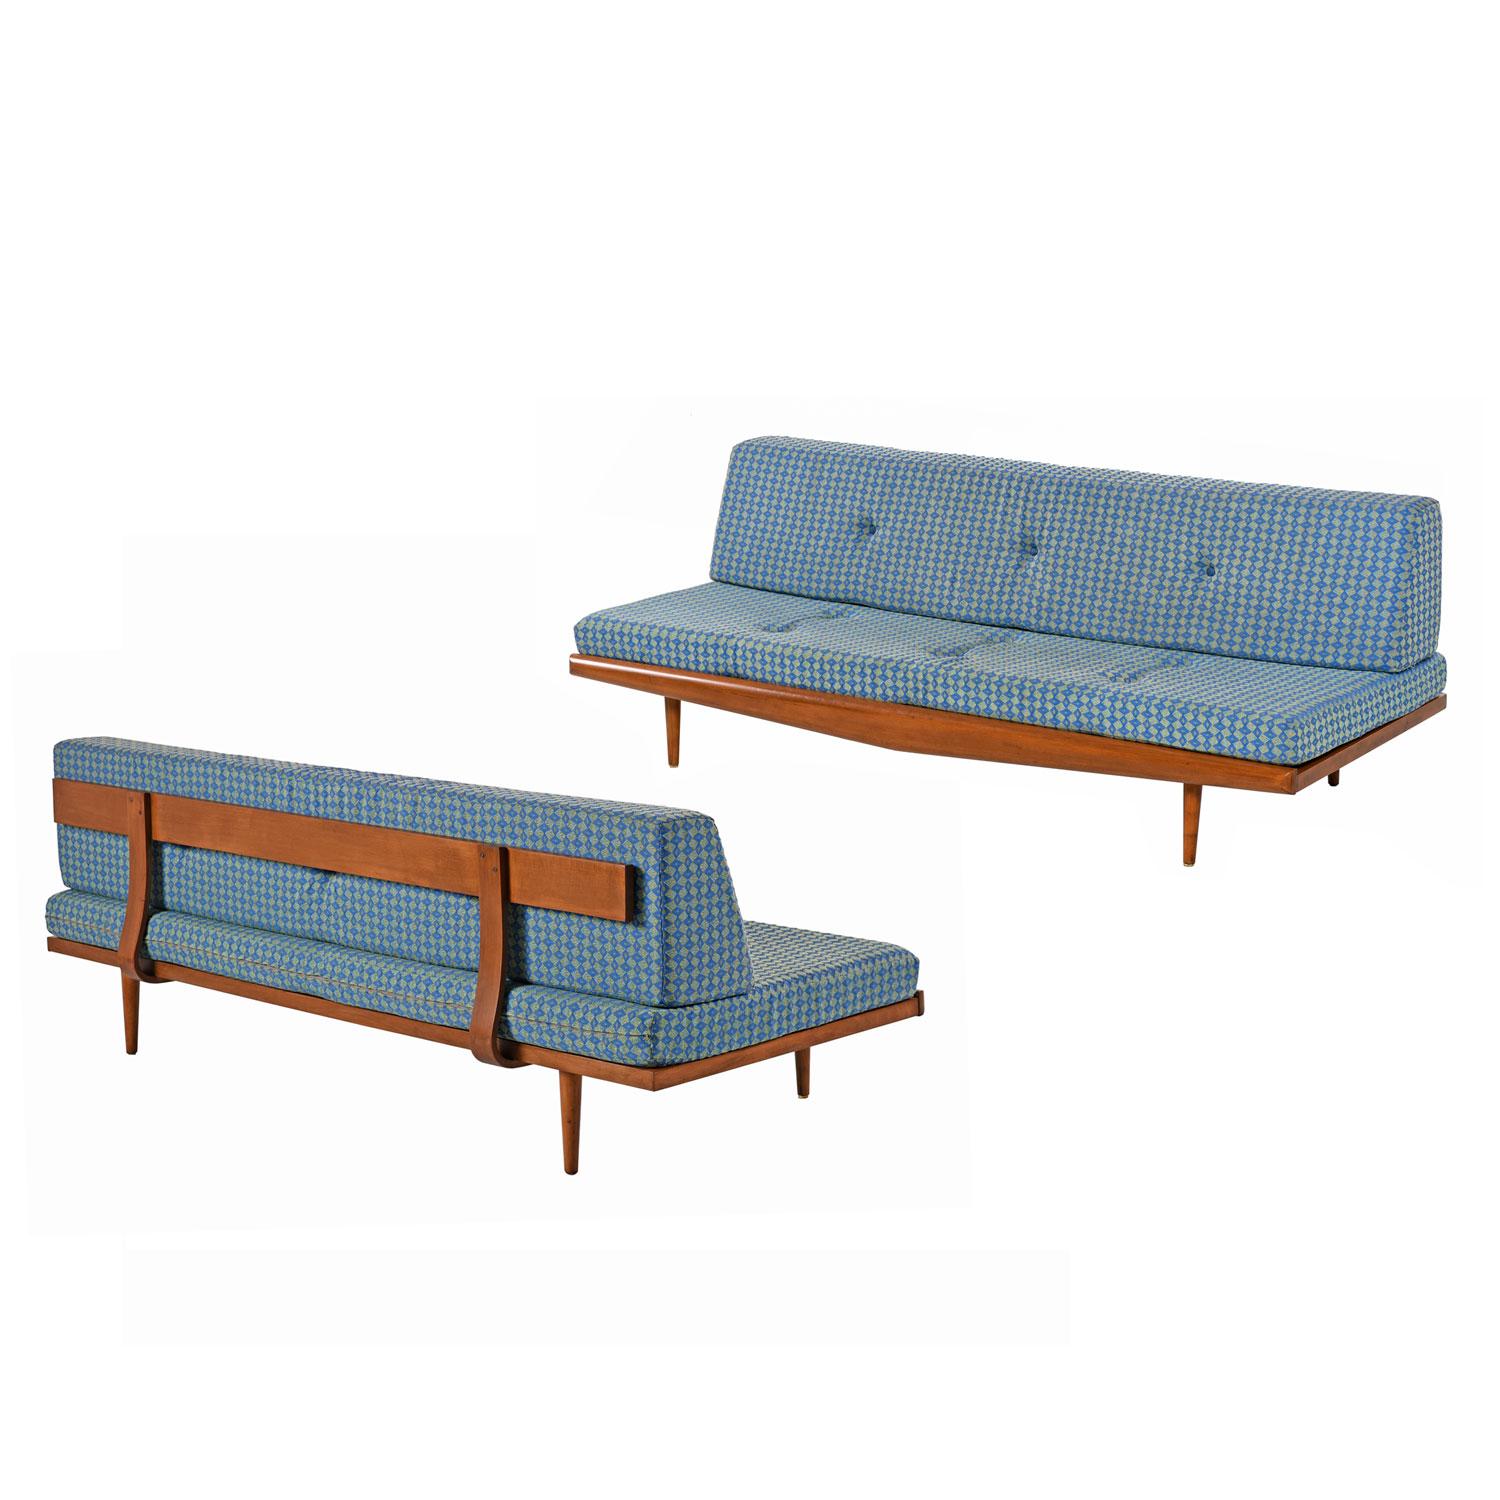 Adrian Pearsall Style Tufted Daybed Sofa Couch, Midcentury Danish Modern